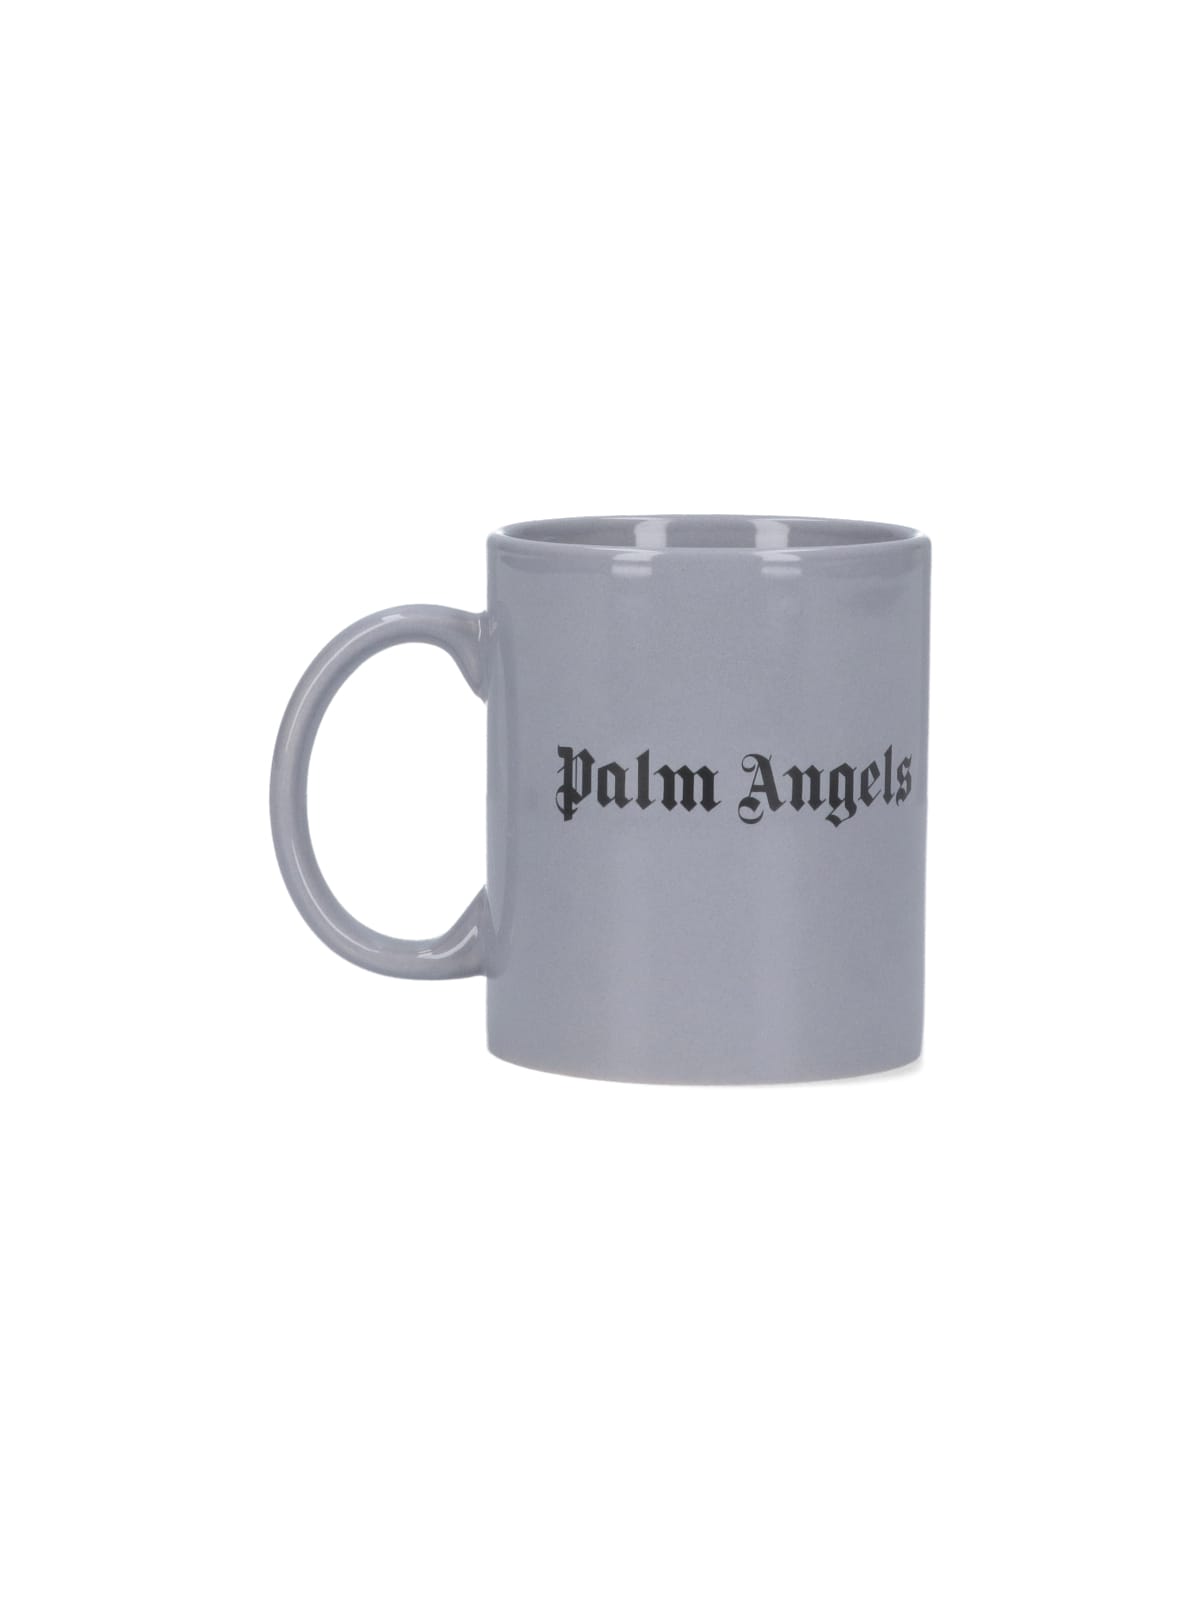 Palm Angels Accessory